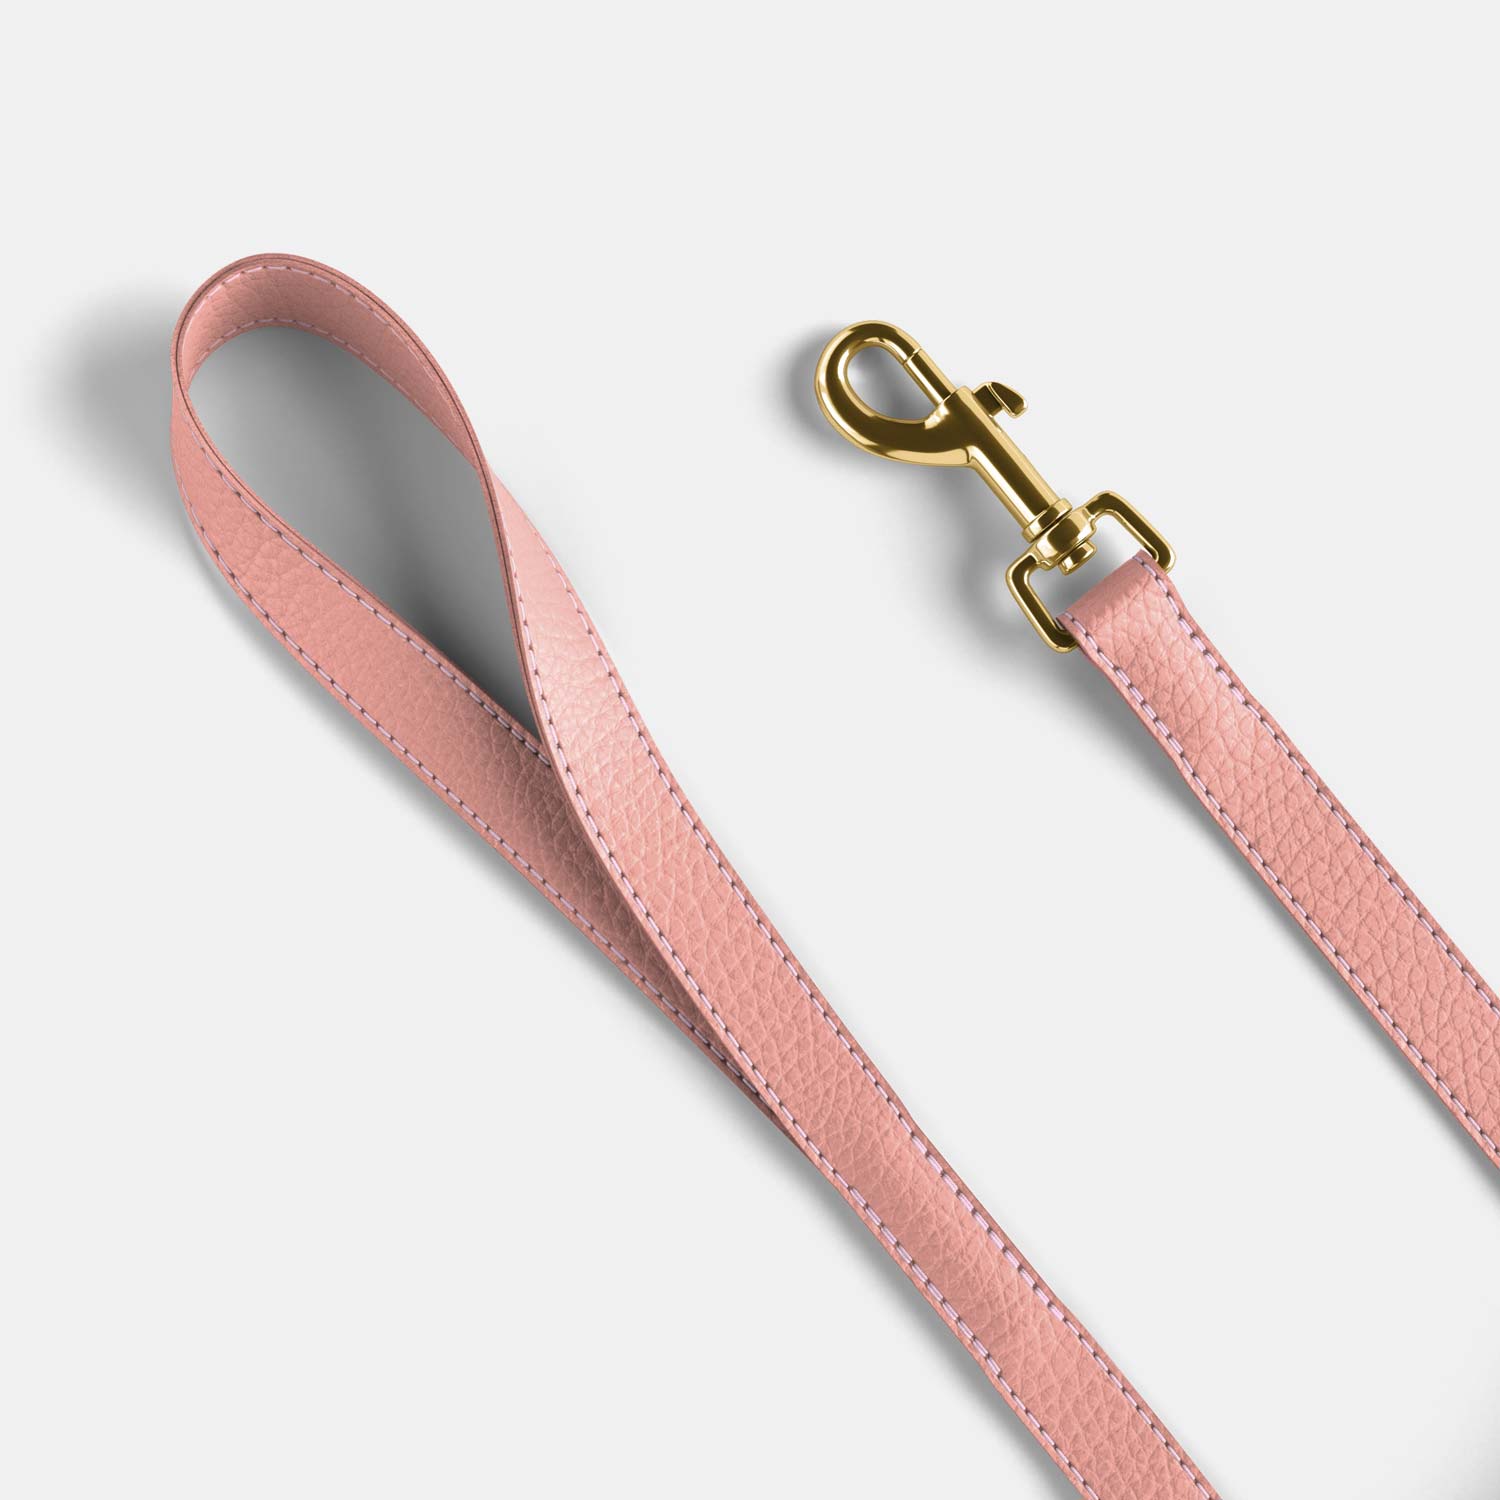 Leather Dog Lead - Grey and Coral